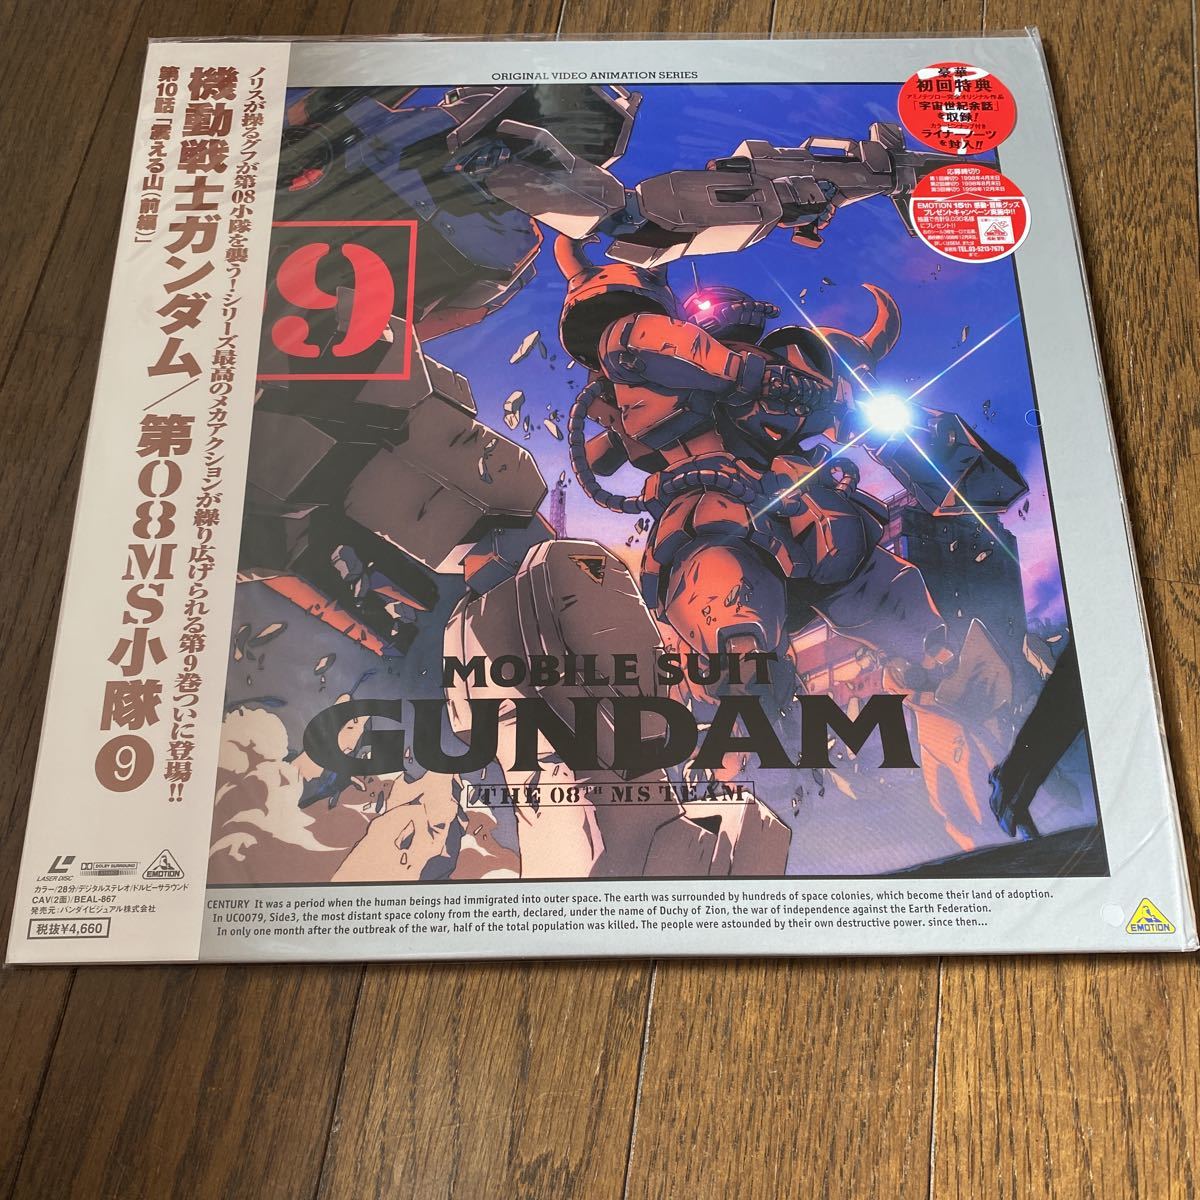  unopened new goods dead stock warehouse storage goods LD laser disk Mobile Suit Gundam no. 08MS small .vol.9... mountain ( front compilation )